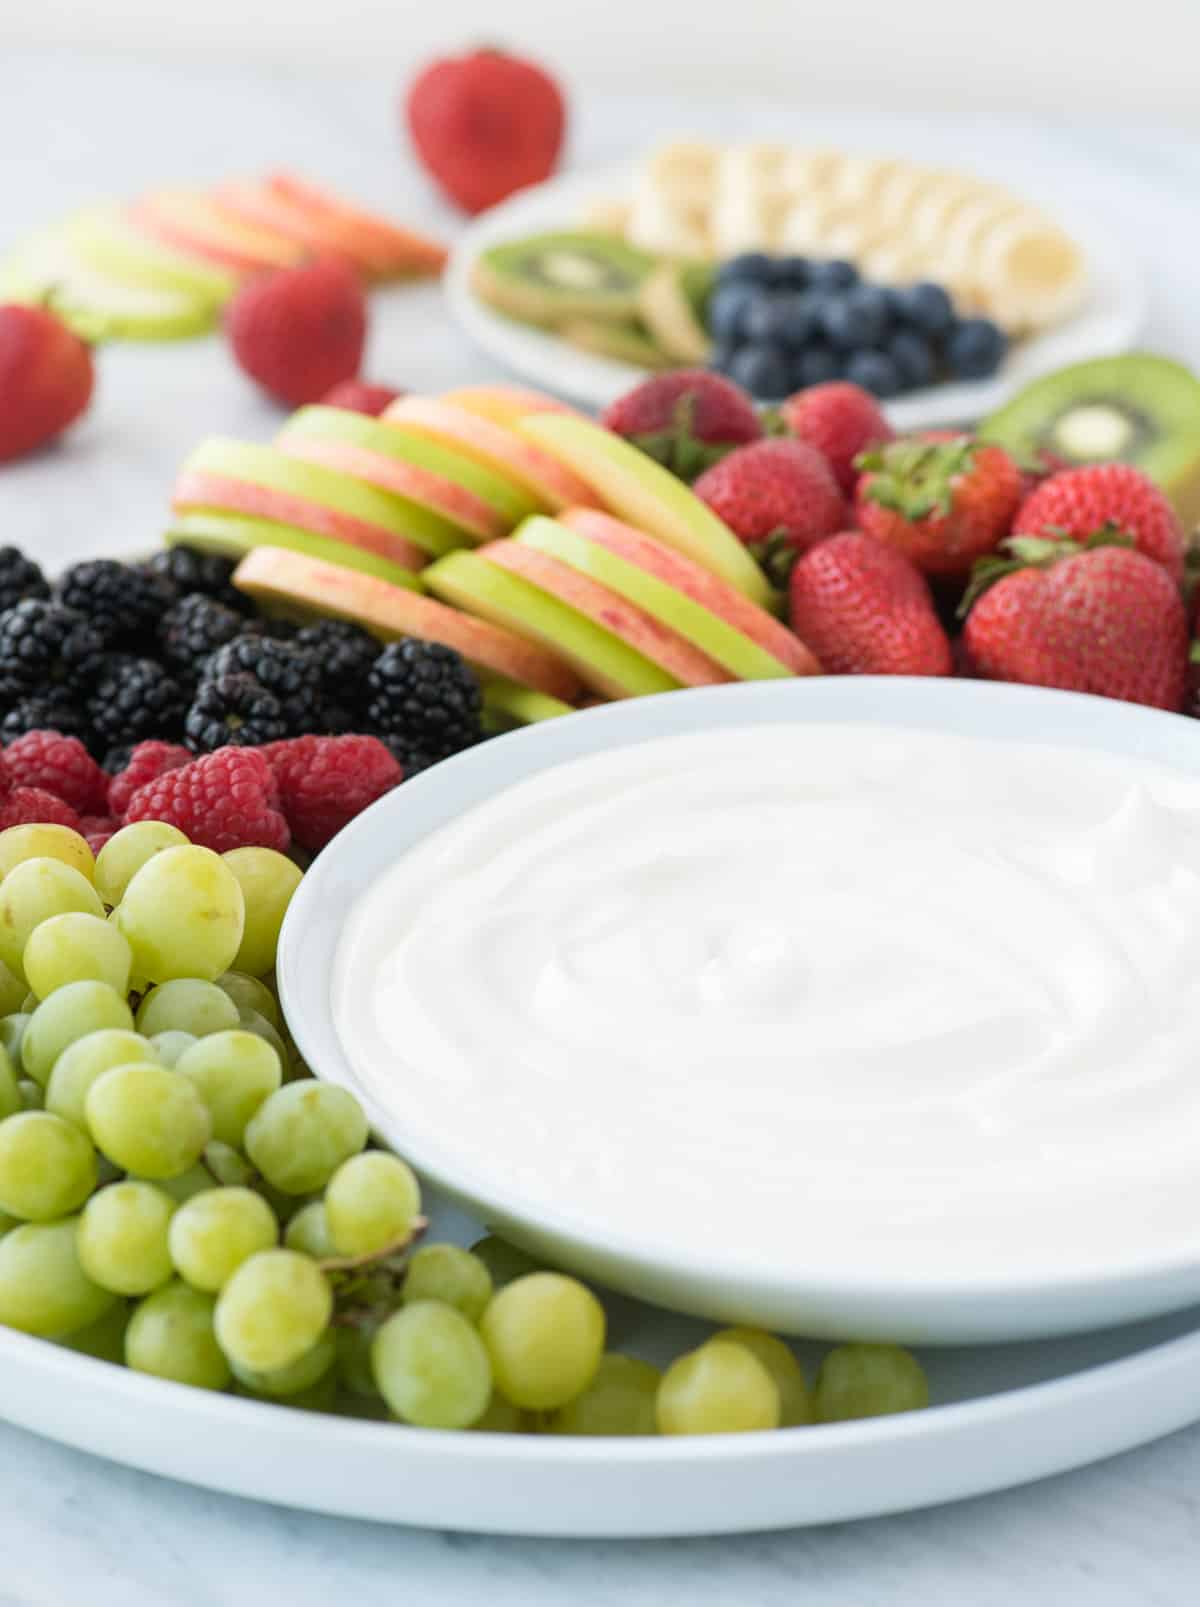 round platter filled with strawberries, apples, blackberries, raspberries and grapes with a bowl of white fruit dip 